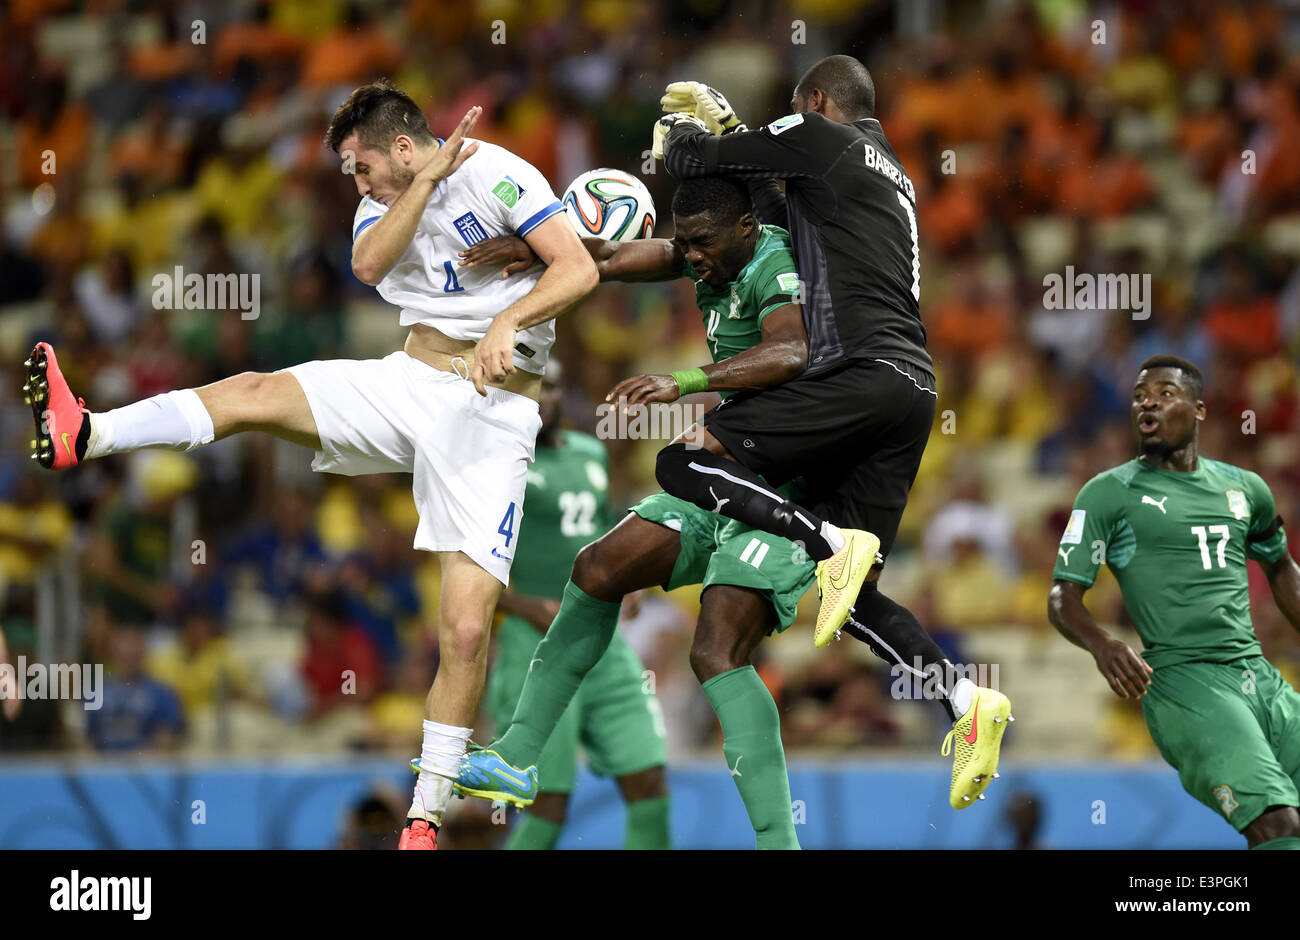 (140624) -- FORTALEZA, June 24, 2014 (Xinhua) -- Cote d'Ivoire's goalkeeper Boubacar Barry (1st R, top) blocks the ball during a Group C match between Greece and Cote d'Ivoire of 2014 FIFA World Cup at the Estadio Castelao Stadium in Fortaleza, Brazil, June 24, 2014. (Xinhua/Yang Lei)(xzj) Stock Photo